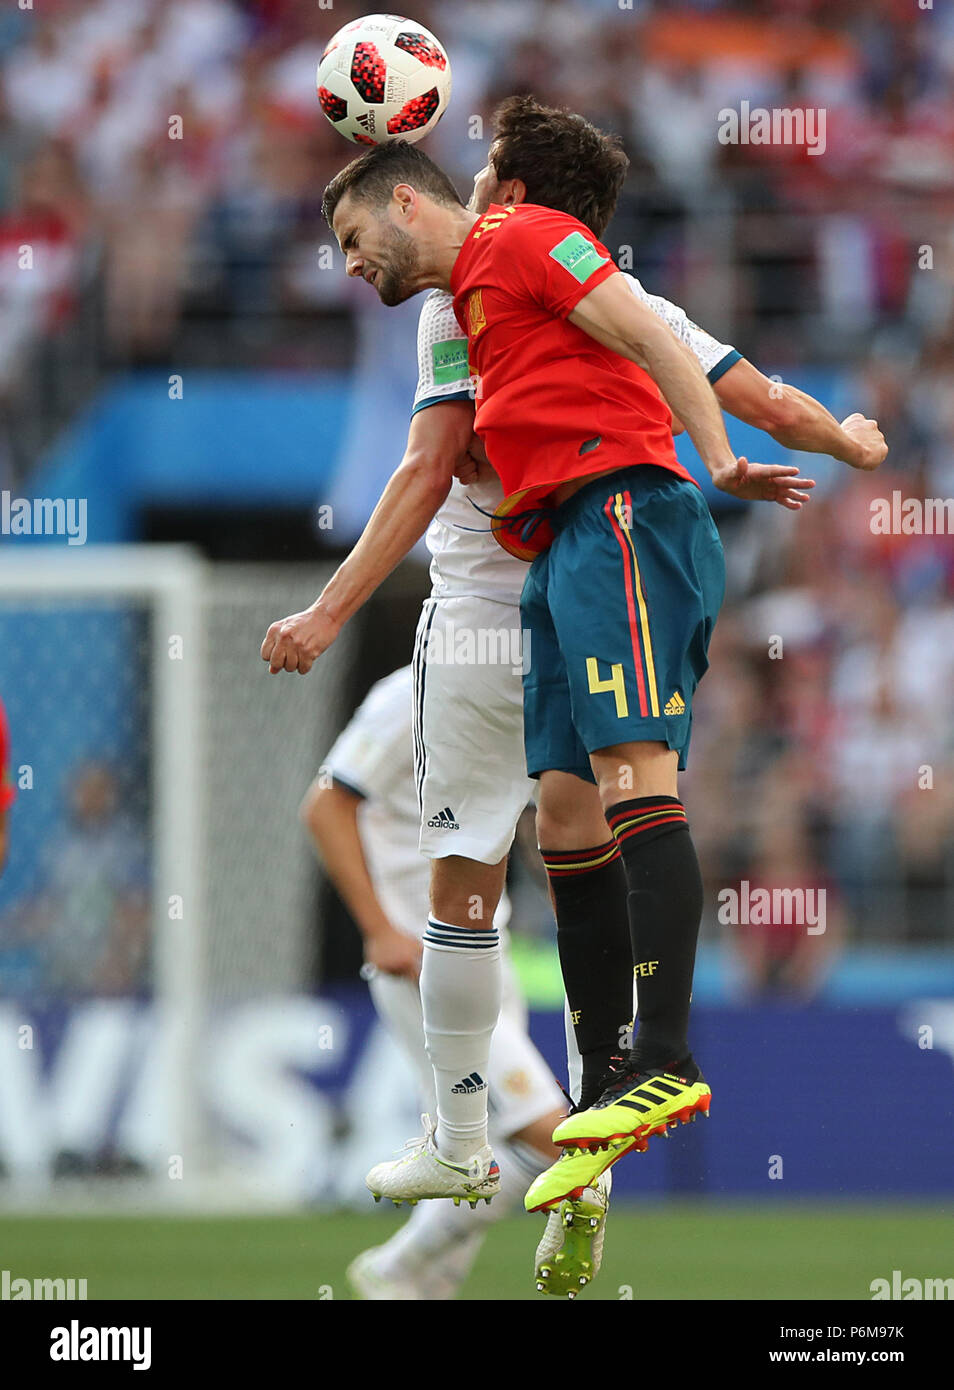 Moscow, Russia. 1st July, 2018. Nacho (front) of Spain vies with Yury Zhirkov of Russia during the 2018 FIFA World Cup round of 16 match between Spain and Russia in Moscow, Russia, July 1, 2018. Credit: Wu Zhuang/Xinhua/Alamy Live News Stock Photo